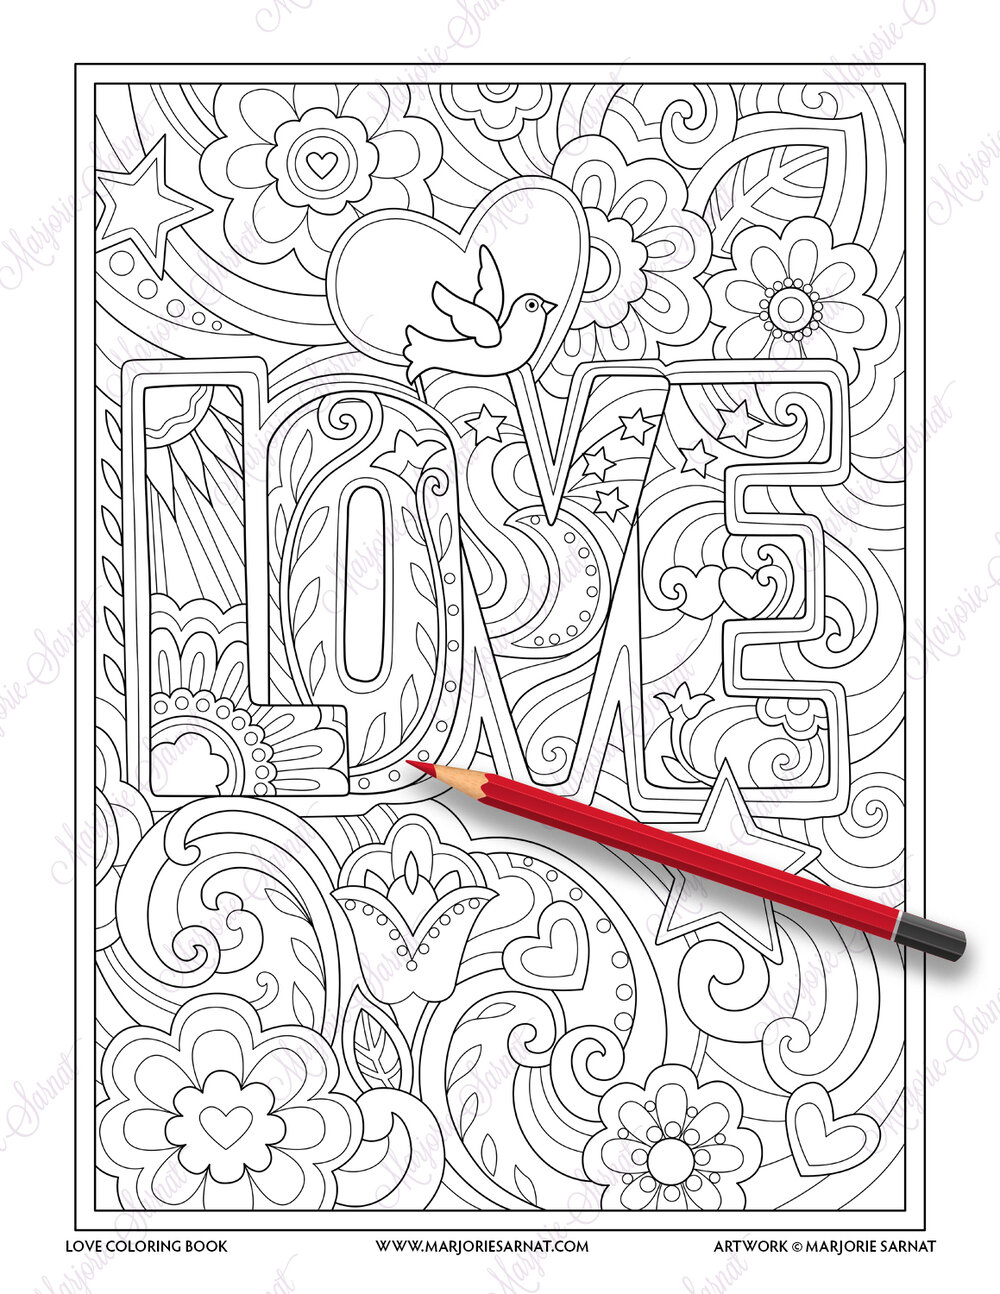 groovy flowers coloring pages